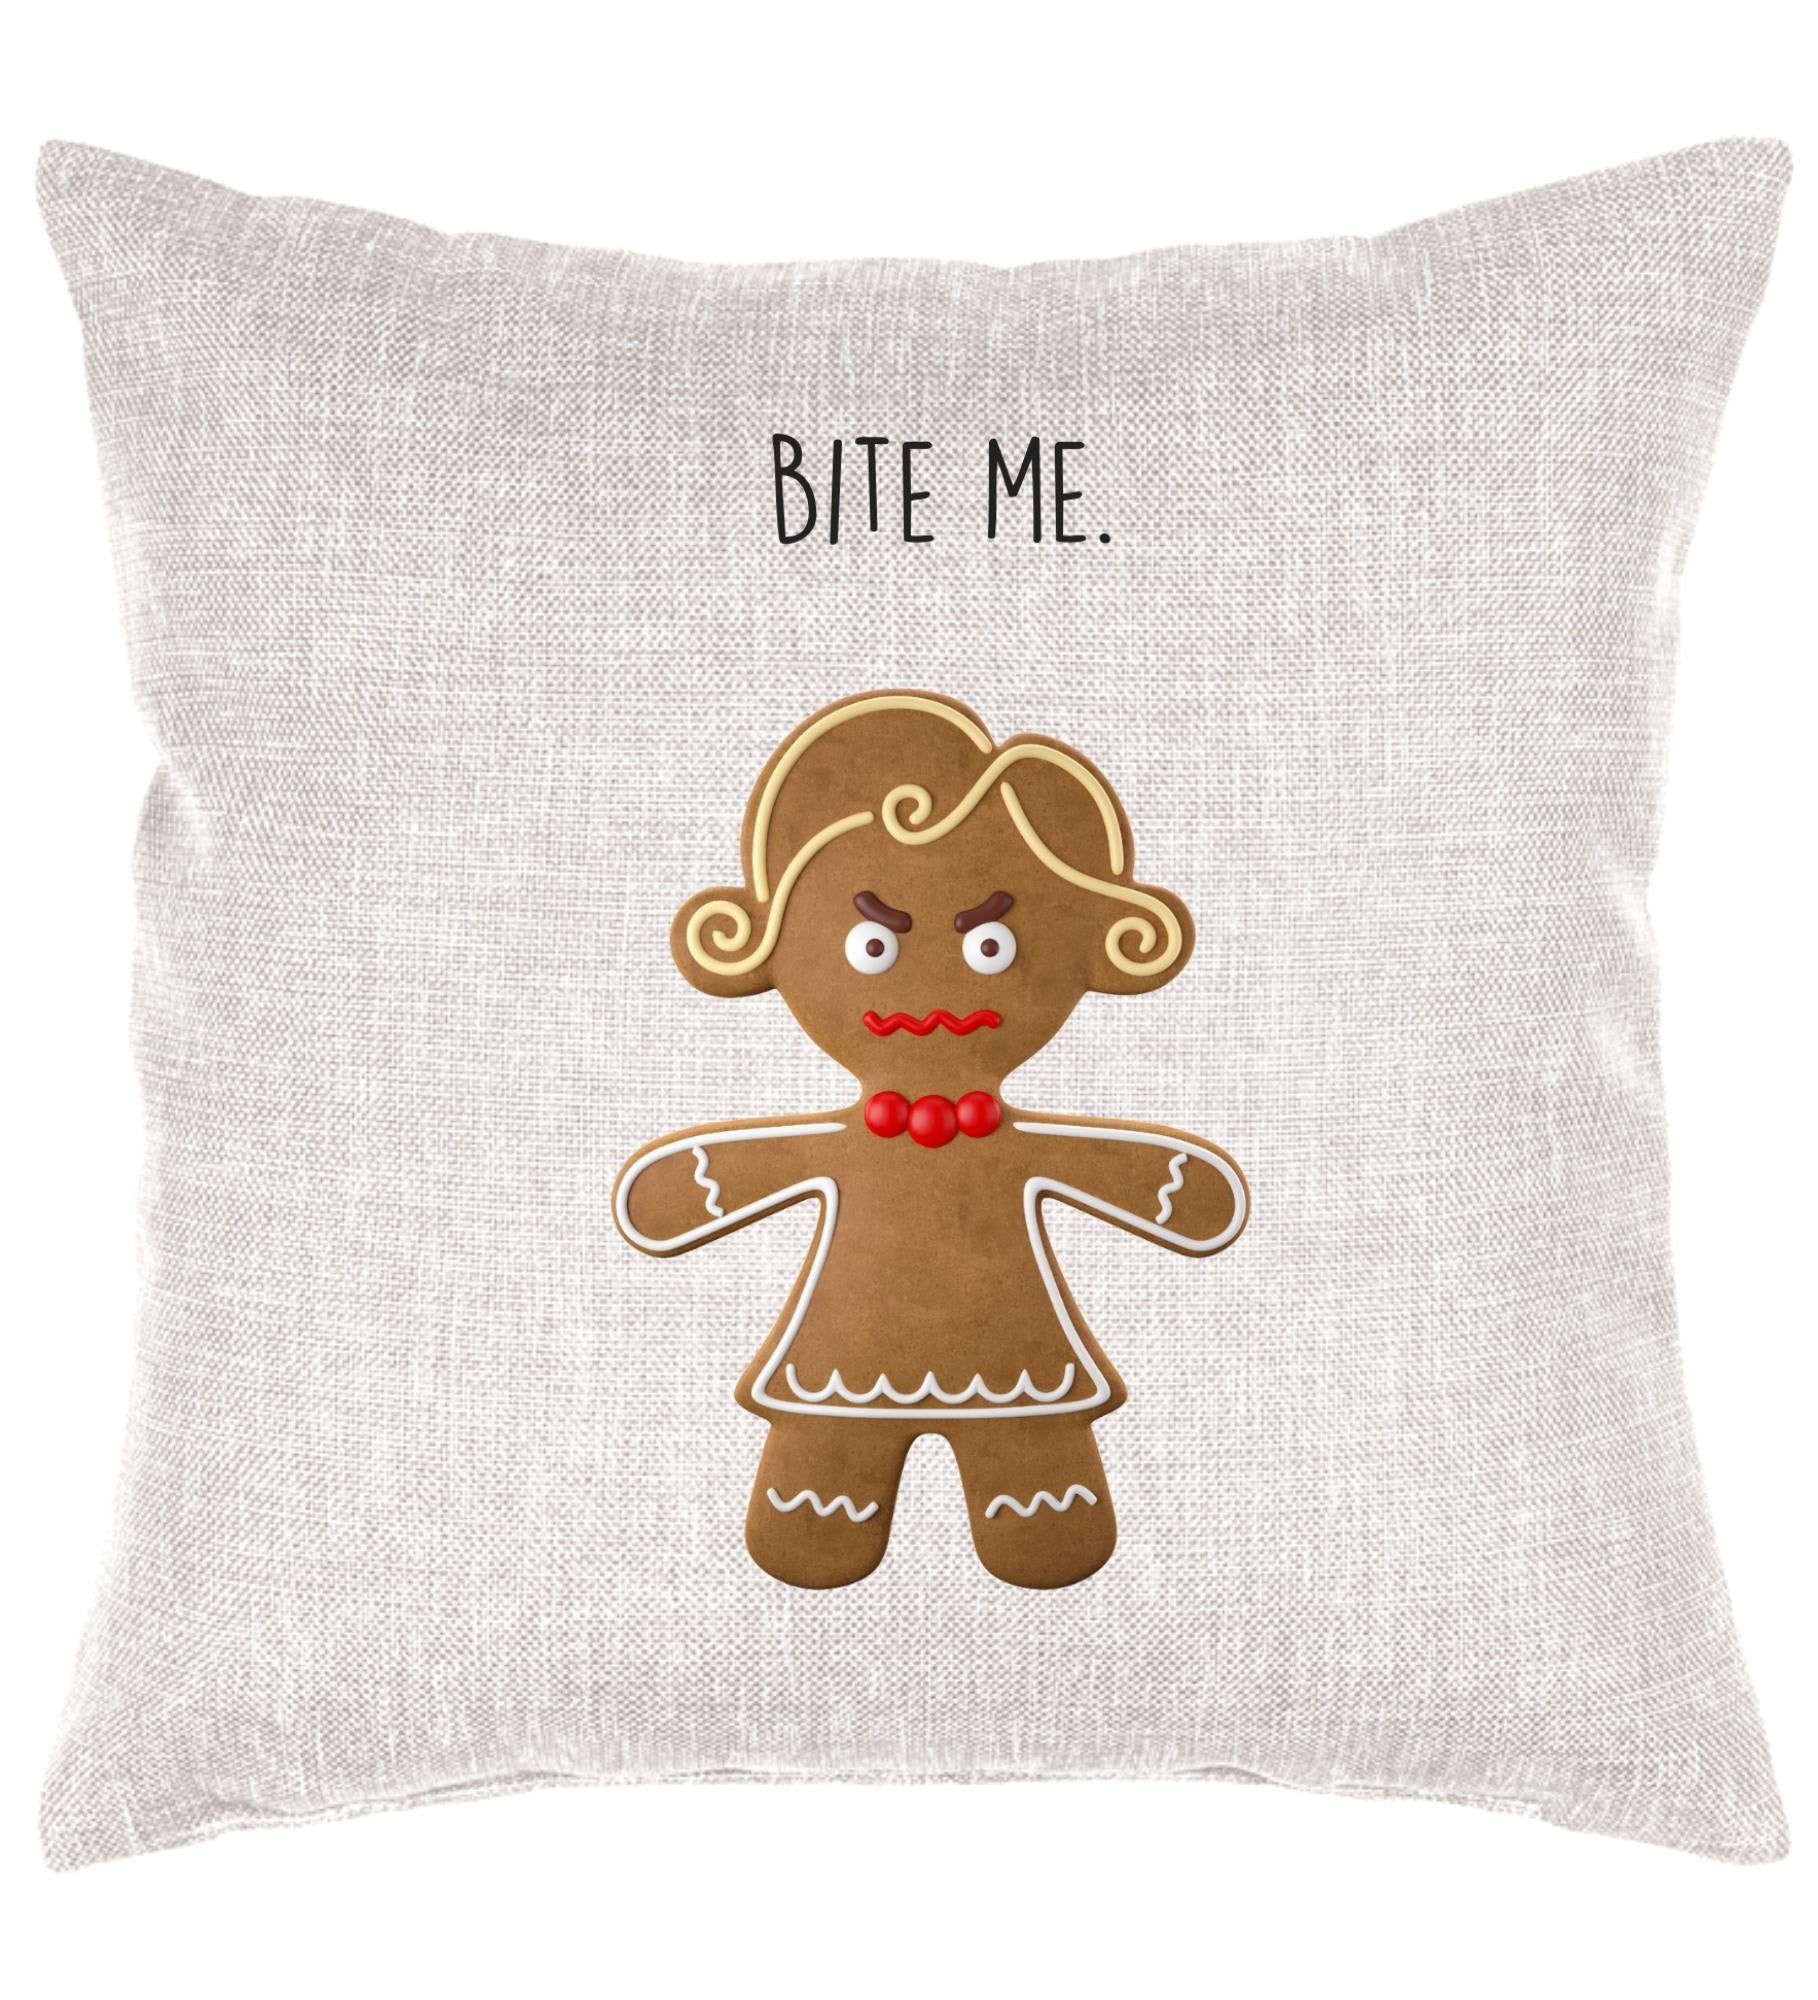 Bite Me Cottage Pillow Throw/Decorative Pillow - Southern Sisters